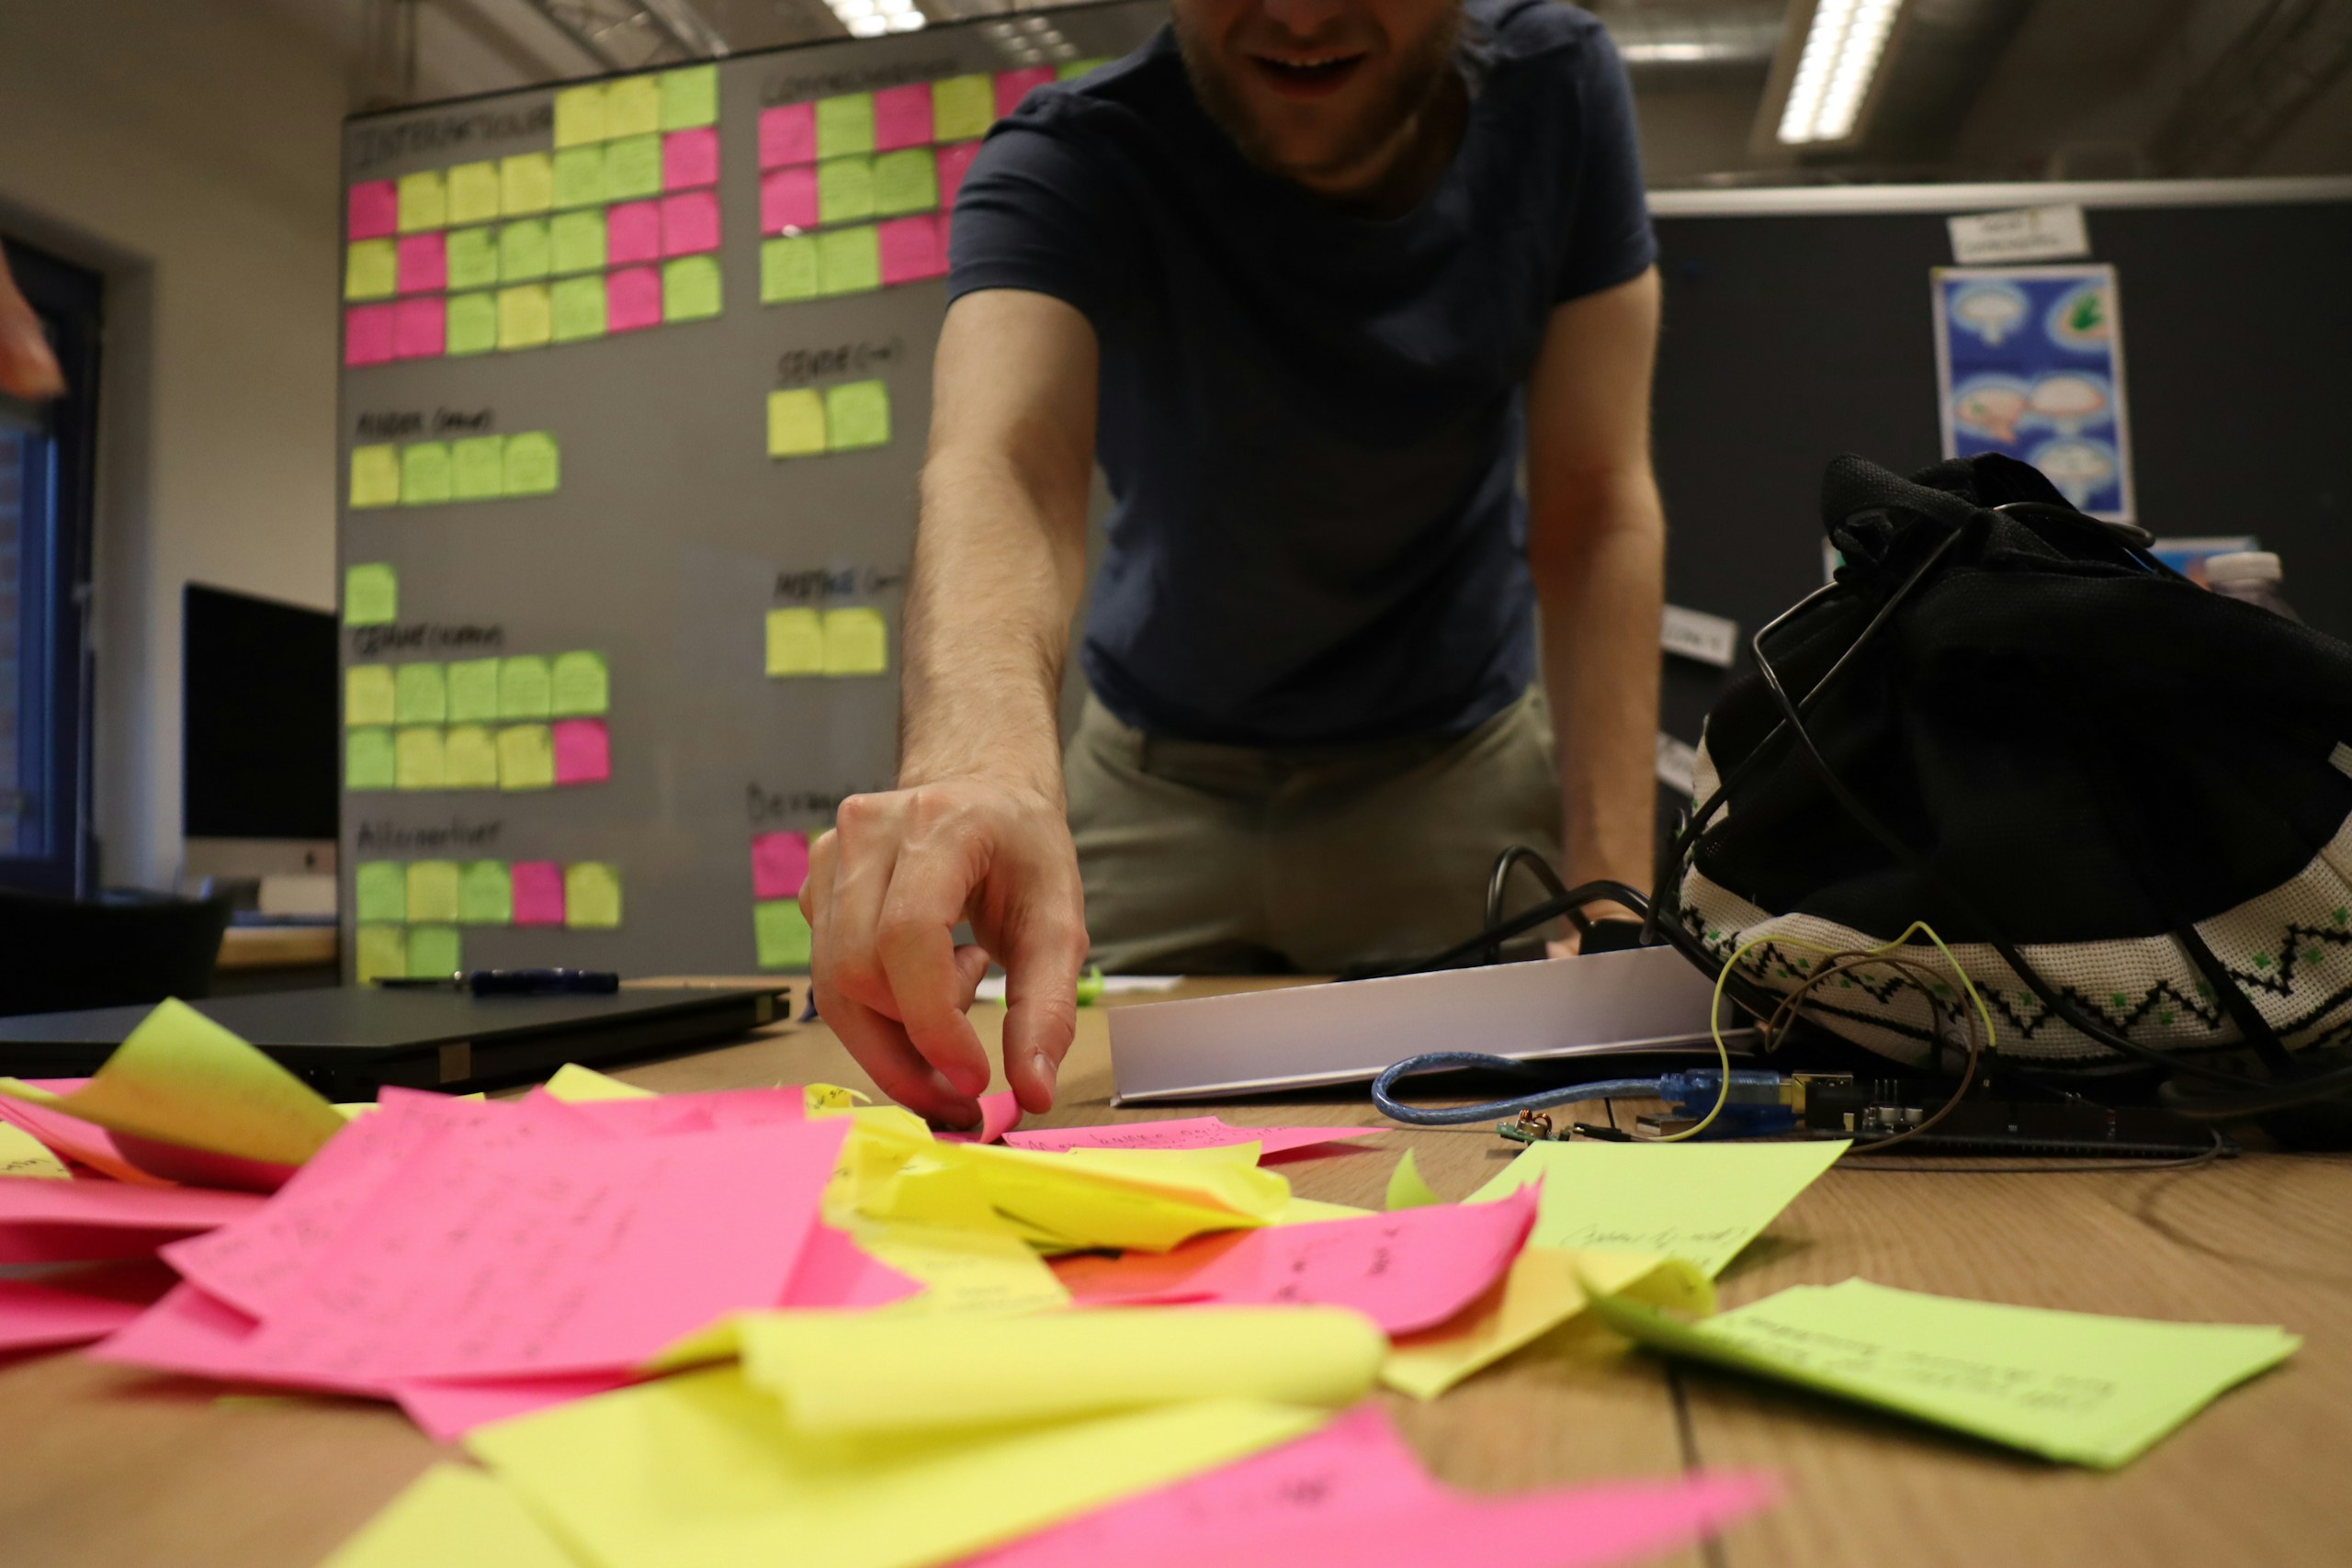 a man is working on a project with sticky notes